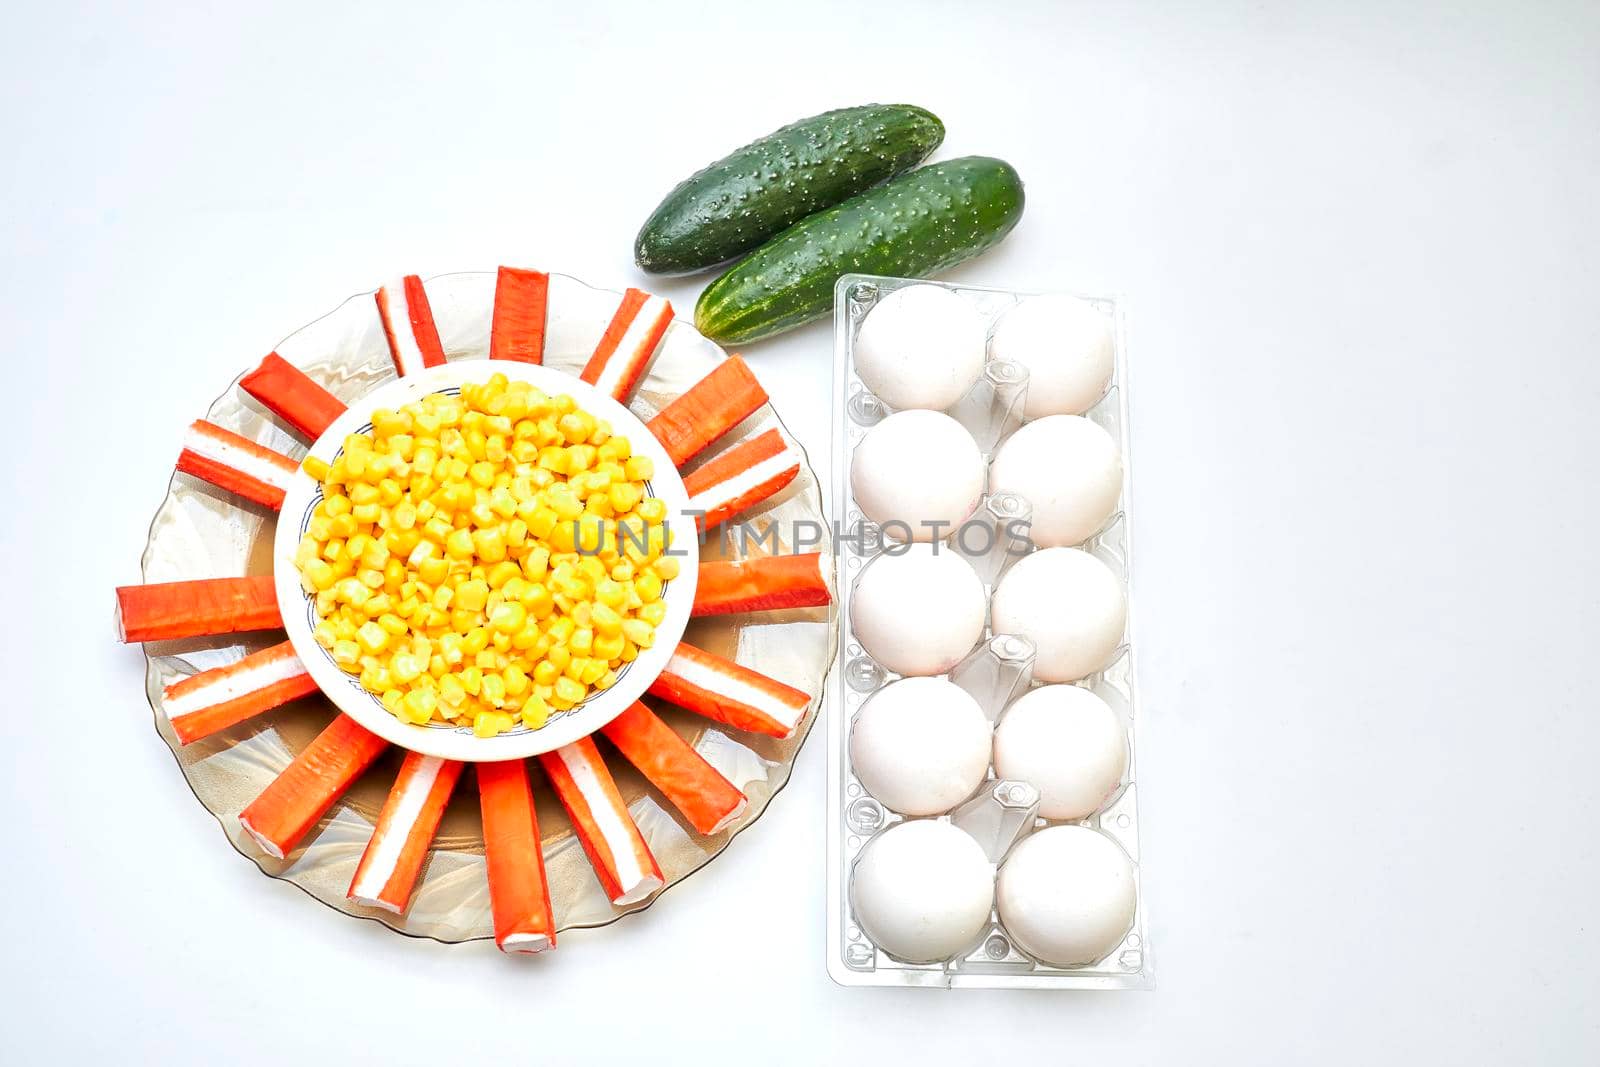 a cold dish of various mixtures of raw or cooked vegetables, usually seasoned with oil, vinegar, or other dressing and sometimes accompanied by meat, fish, or other ingredients.